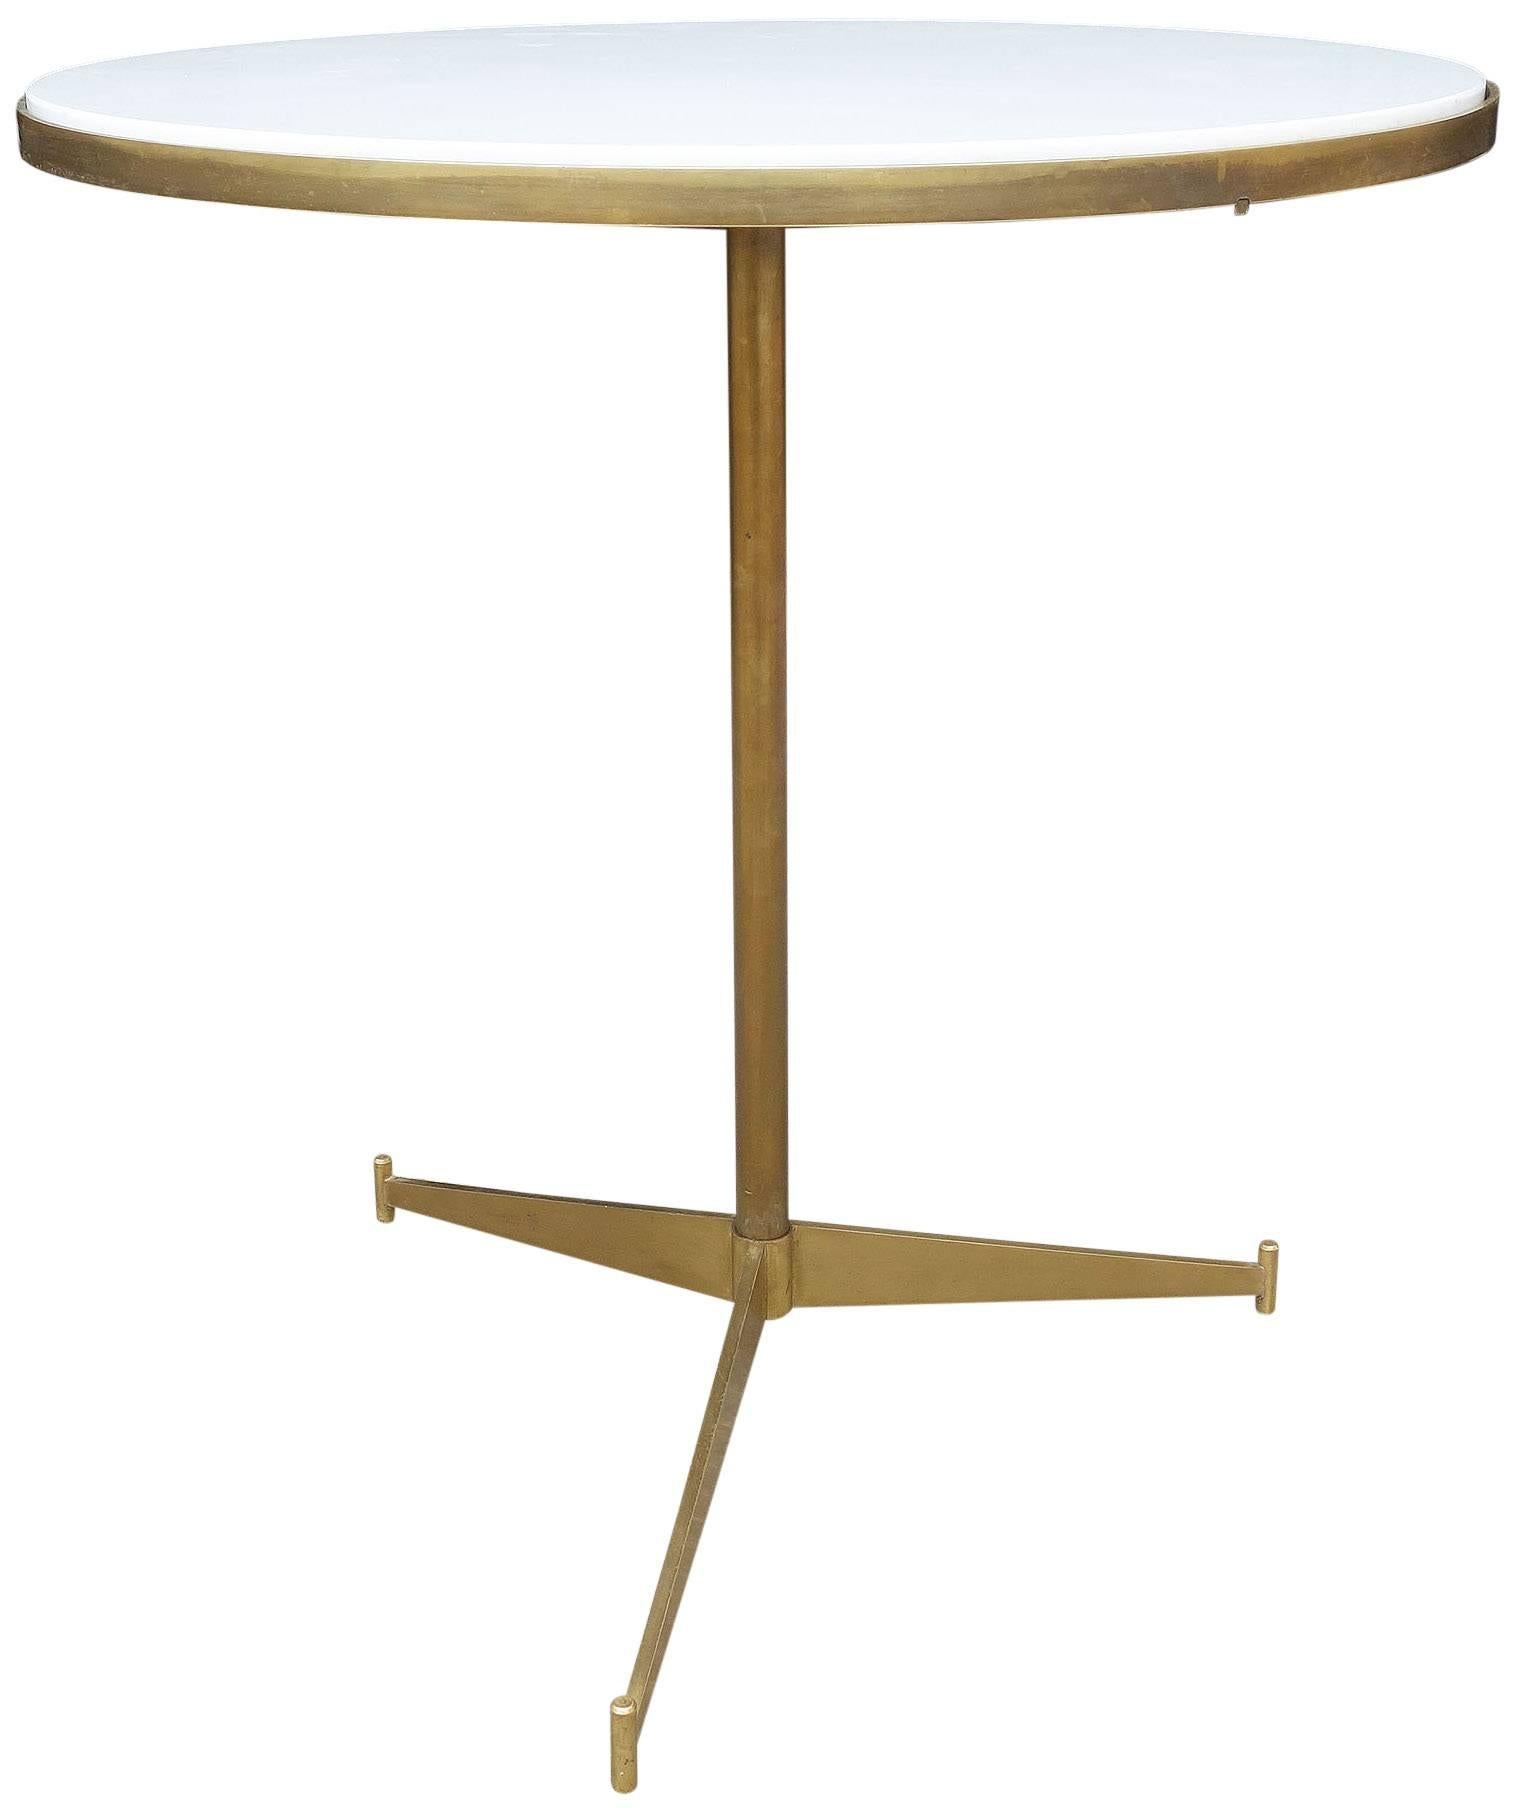 Mid-20th Century Midcentury Paul McCobb Side Table for Directional